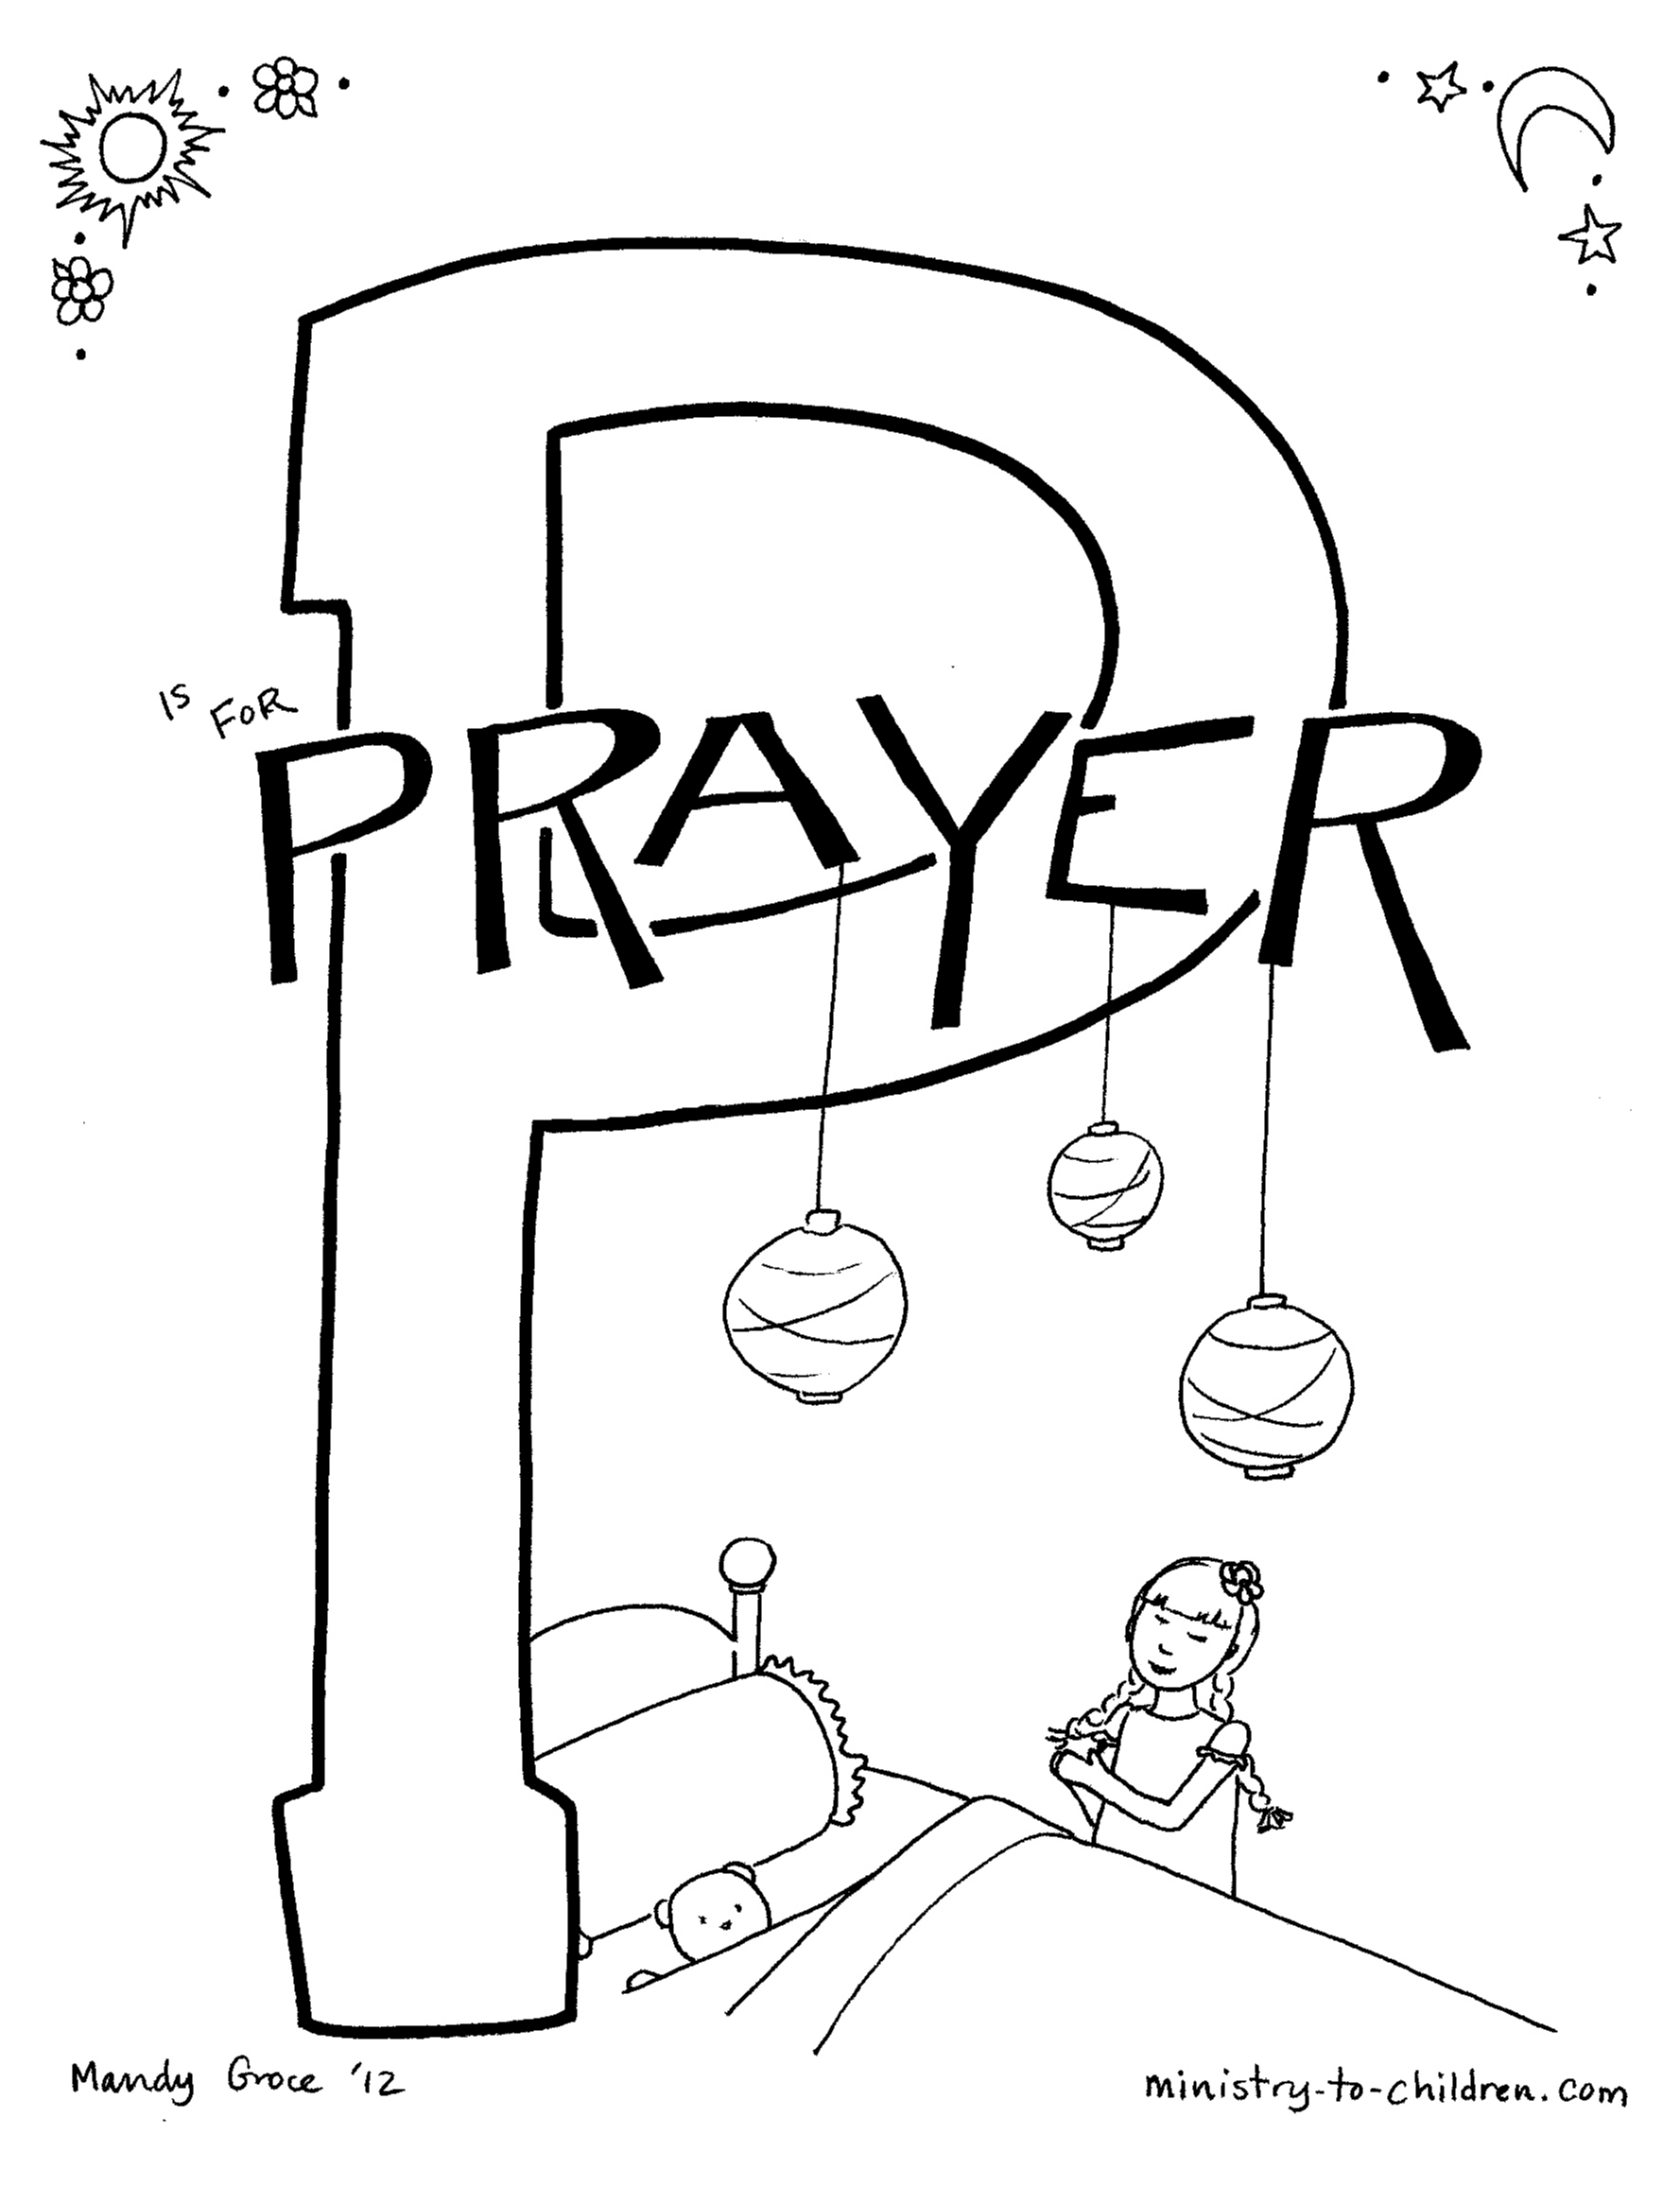 free-prayer-coloring-page-for-kids-download-free-prayer-coloring-page-for-kids-png-images